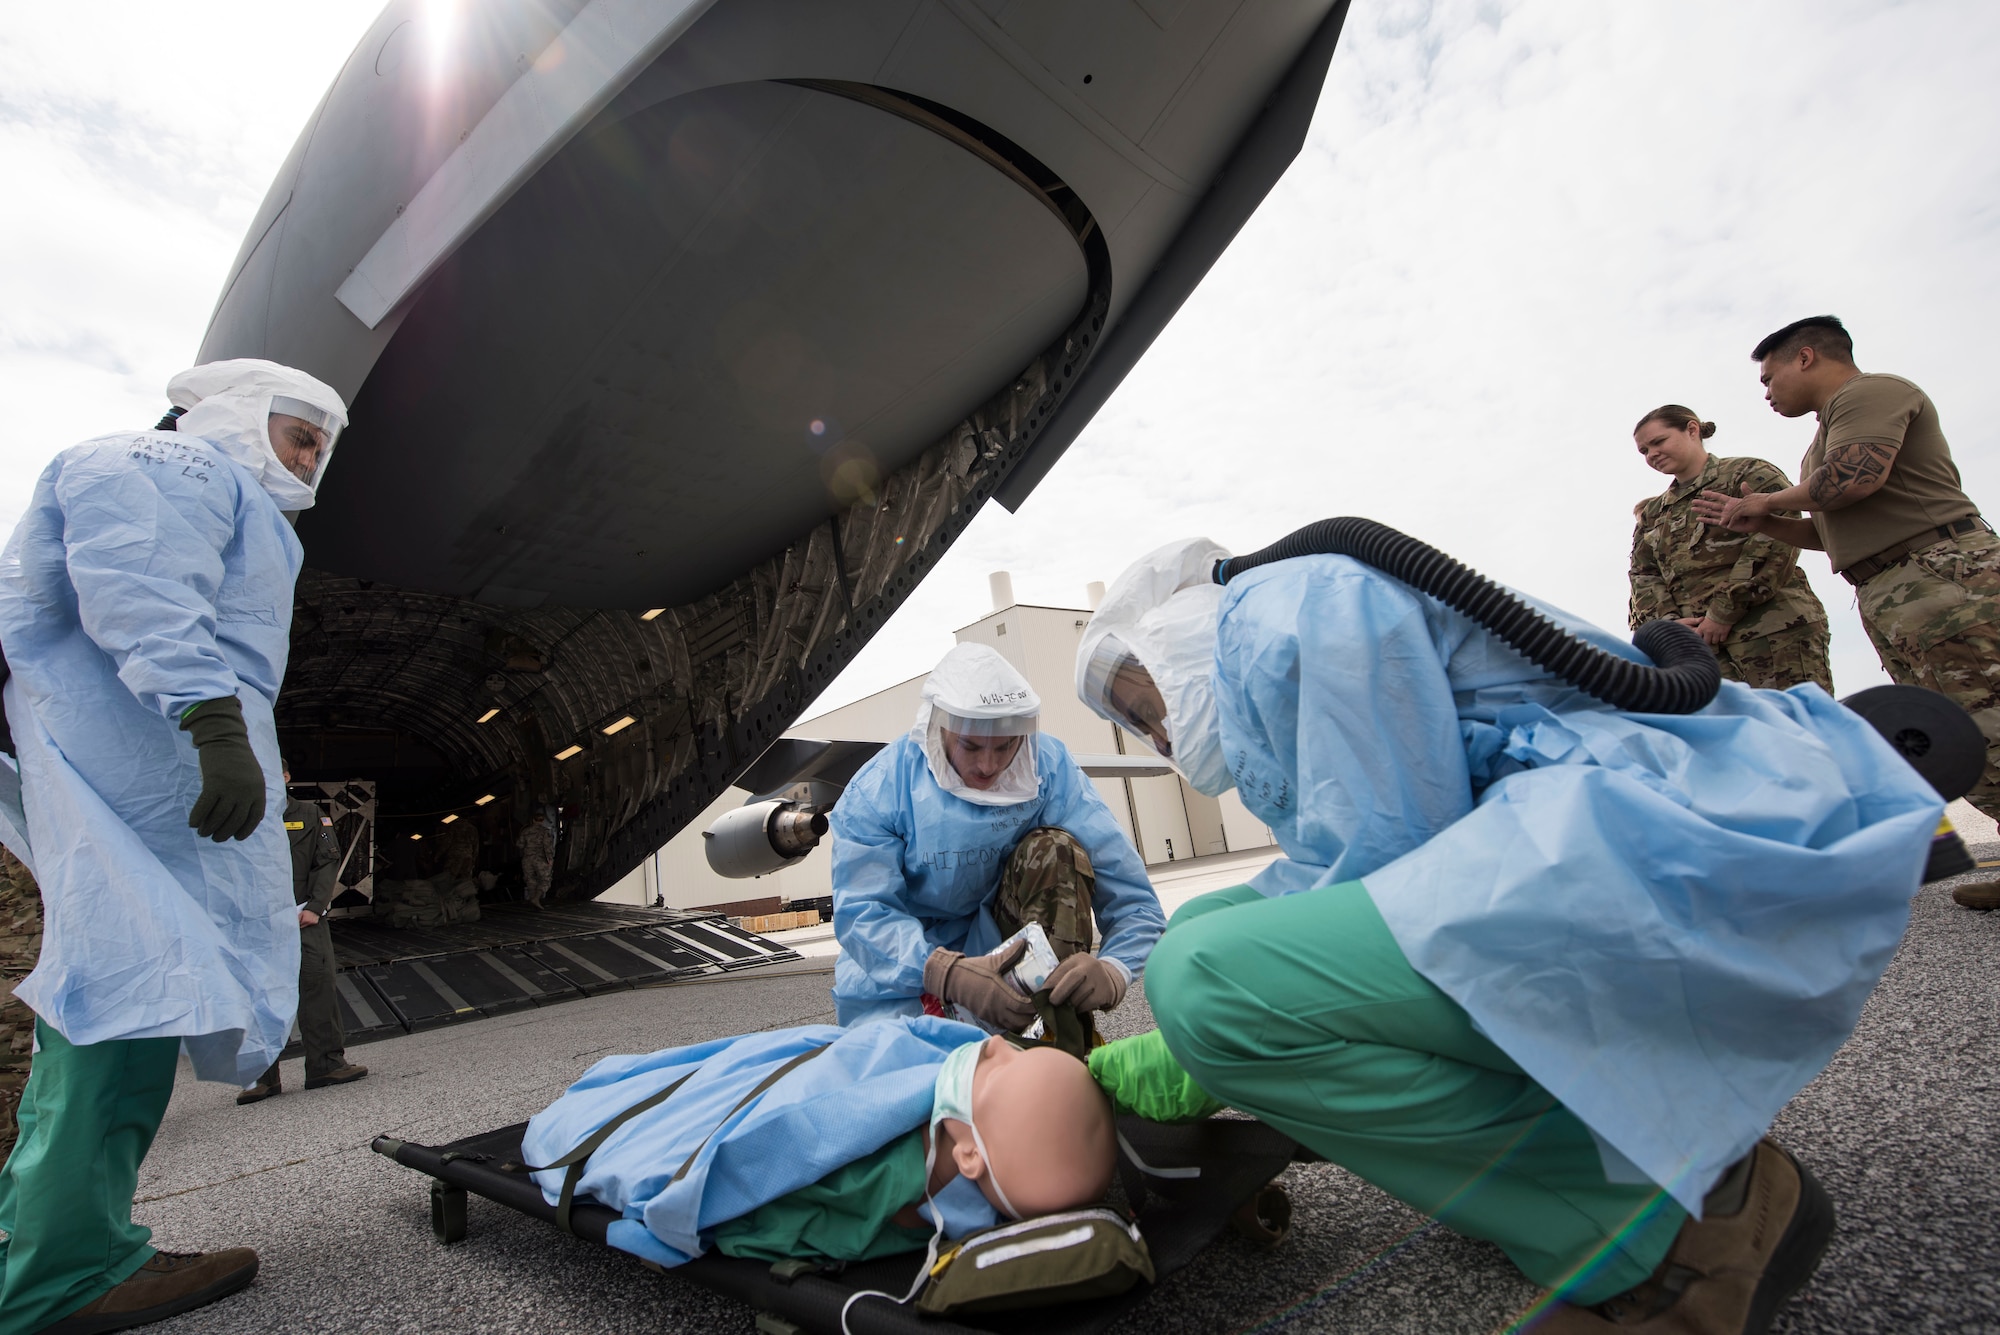 Airmen participating in Transport Isolation System training prepare a mock patient for transport during a training scenario at Joint Base Charleston, S.C., April 5, 2020.